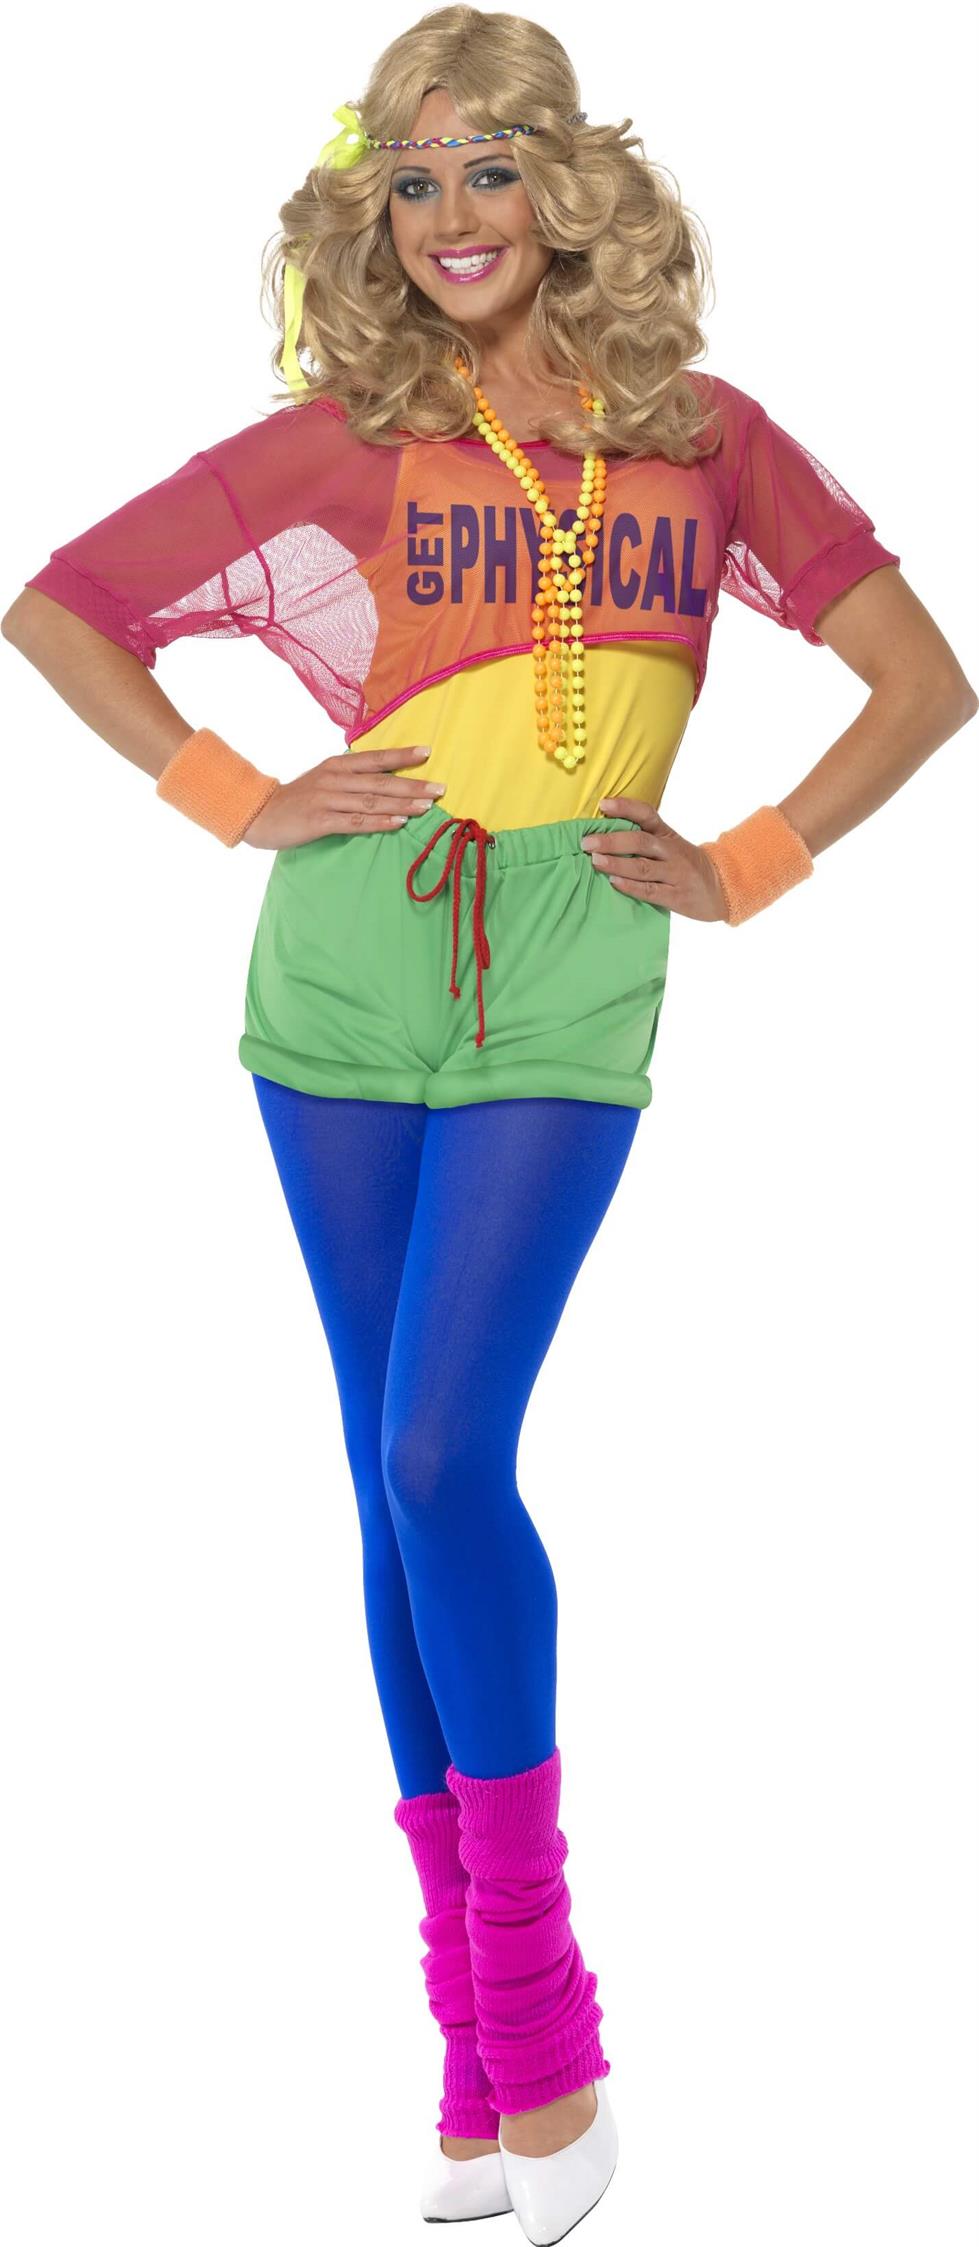 Let's Get Physical Women's Costume  Costumes for women, 80s girls, Perfect  outfit